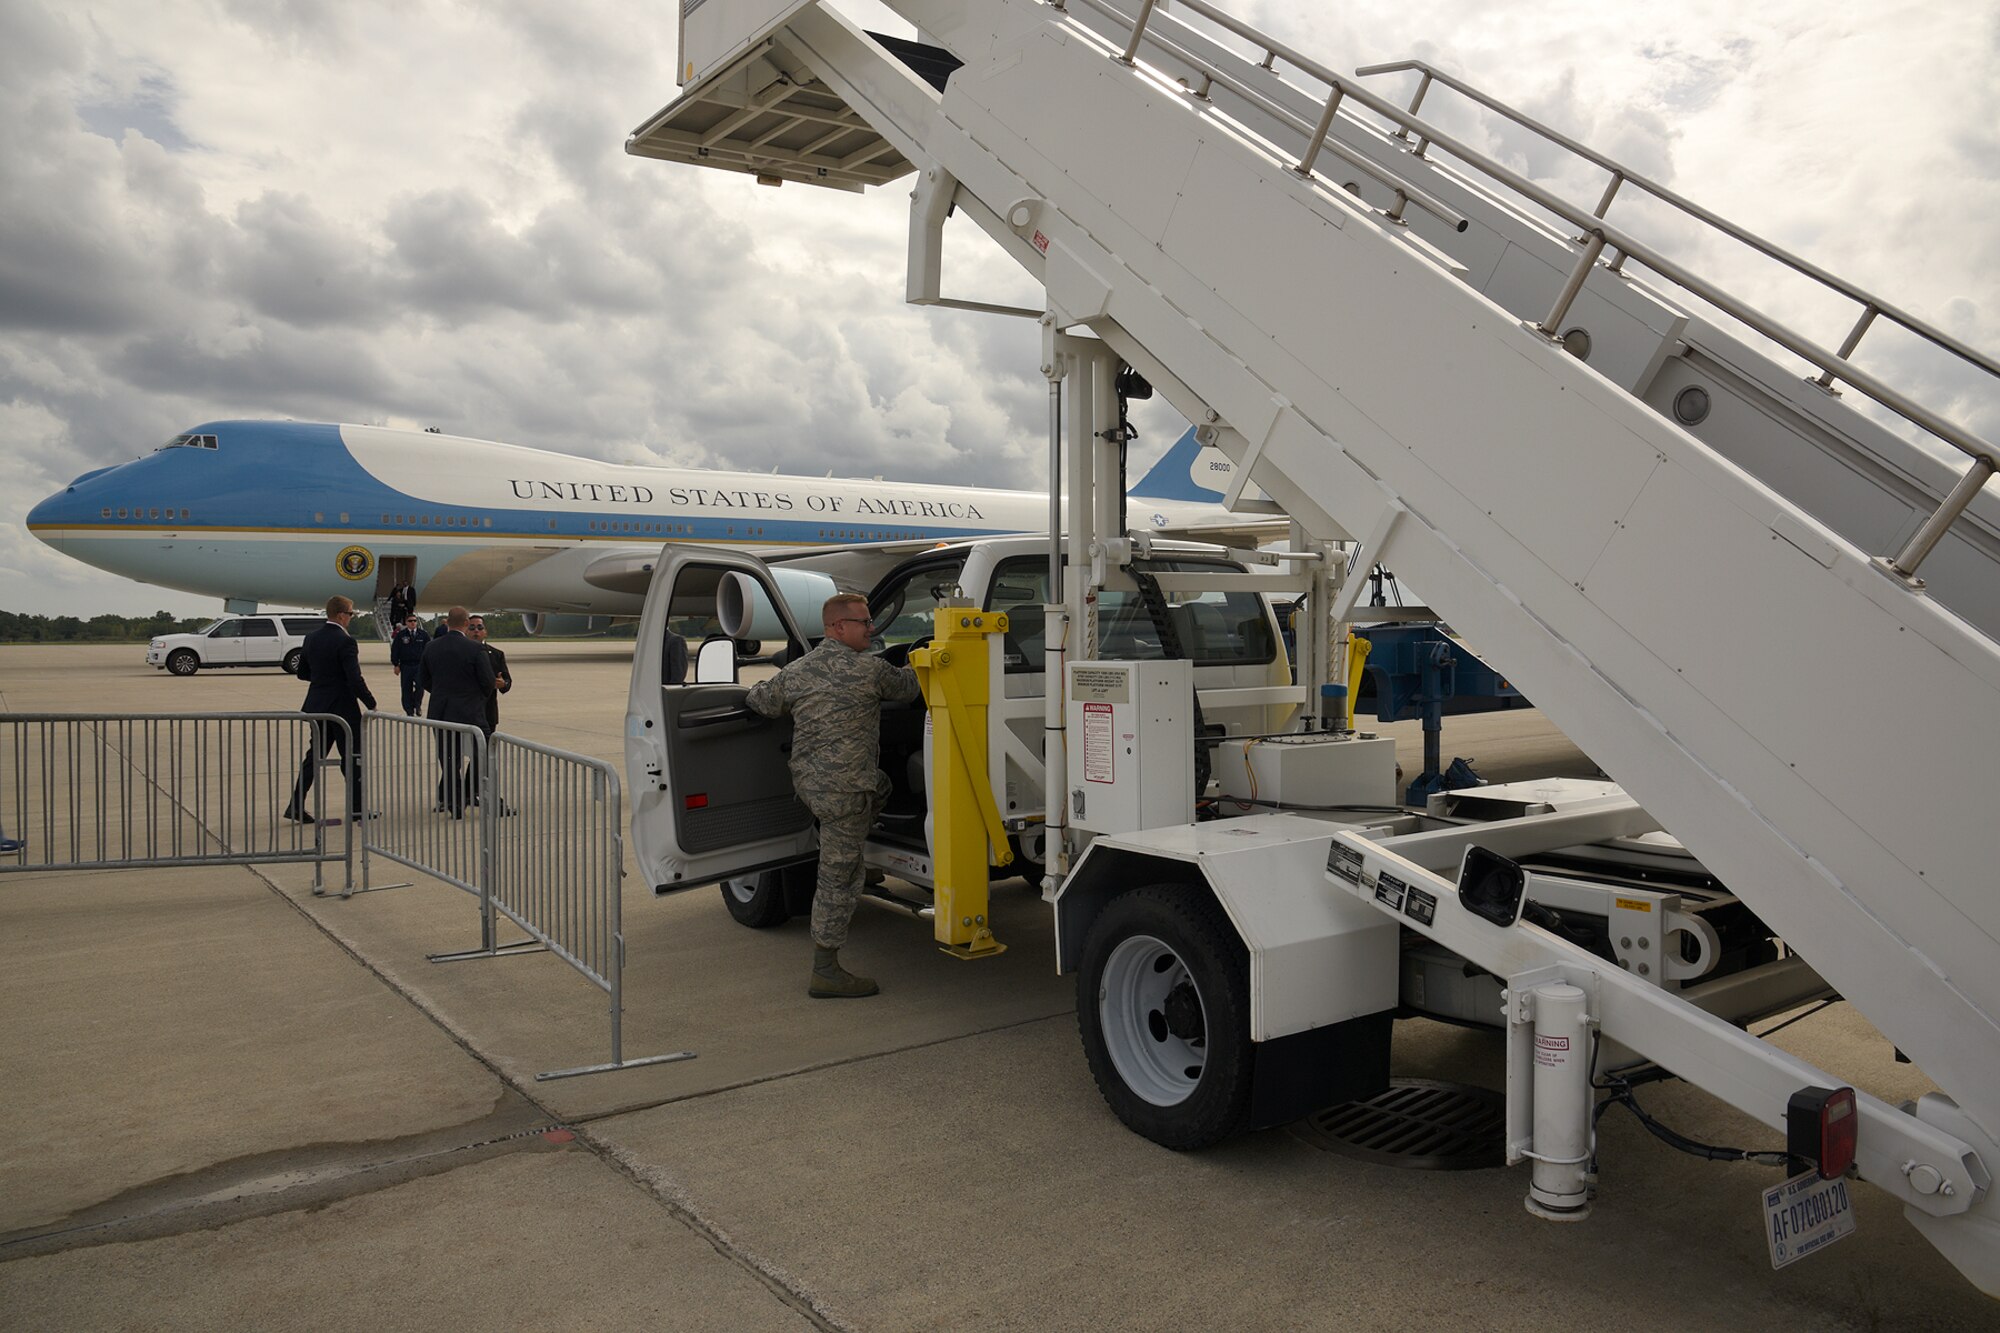 Staff Sgt. Bryan Russell prepares to drive out the air stairs to Air Force One during a visit by President Barack Obama to Selfridge Air National Guard Base, Mich., Sept. 9, 2015. Russell is a member of the 127th Wing, Michigan Air National Guard. President Barack Obama stopped at the base during a trip to nearby Macomb Community College in Warren, Mich., to discuss federal higher education initiatives. (U.S. Air National Guard photo by Master Sgt. David Kujawa / Released)